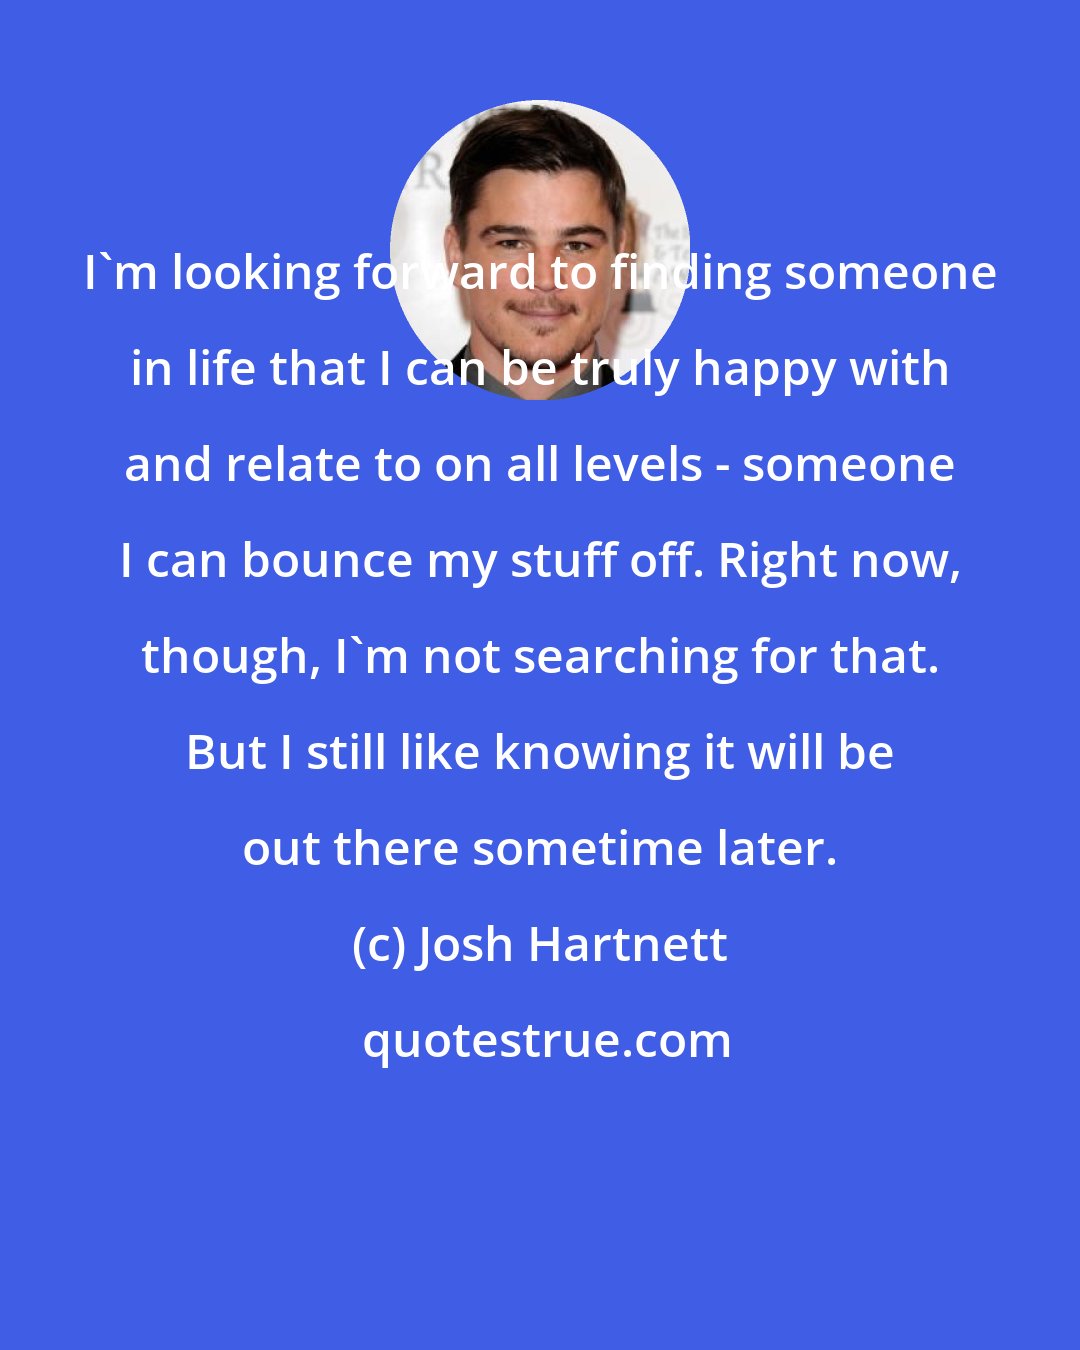 Josh Hartnett: I'm looking forward to finding someone in life that I can be truly happy with and relate to on all levels - someone I can bounce my stuff off. Right now, though, I'm not searching for that. But I still like knowing it will be out there sometime later.